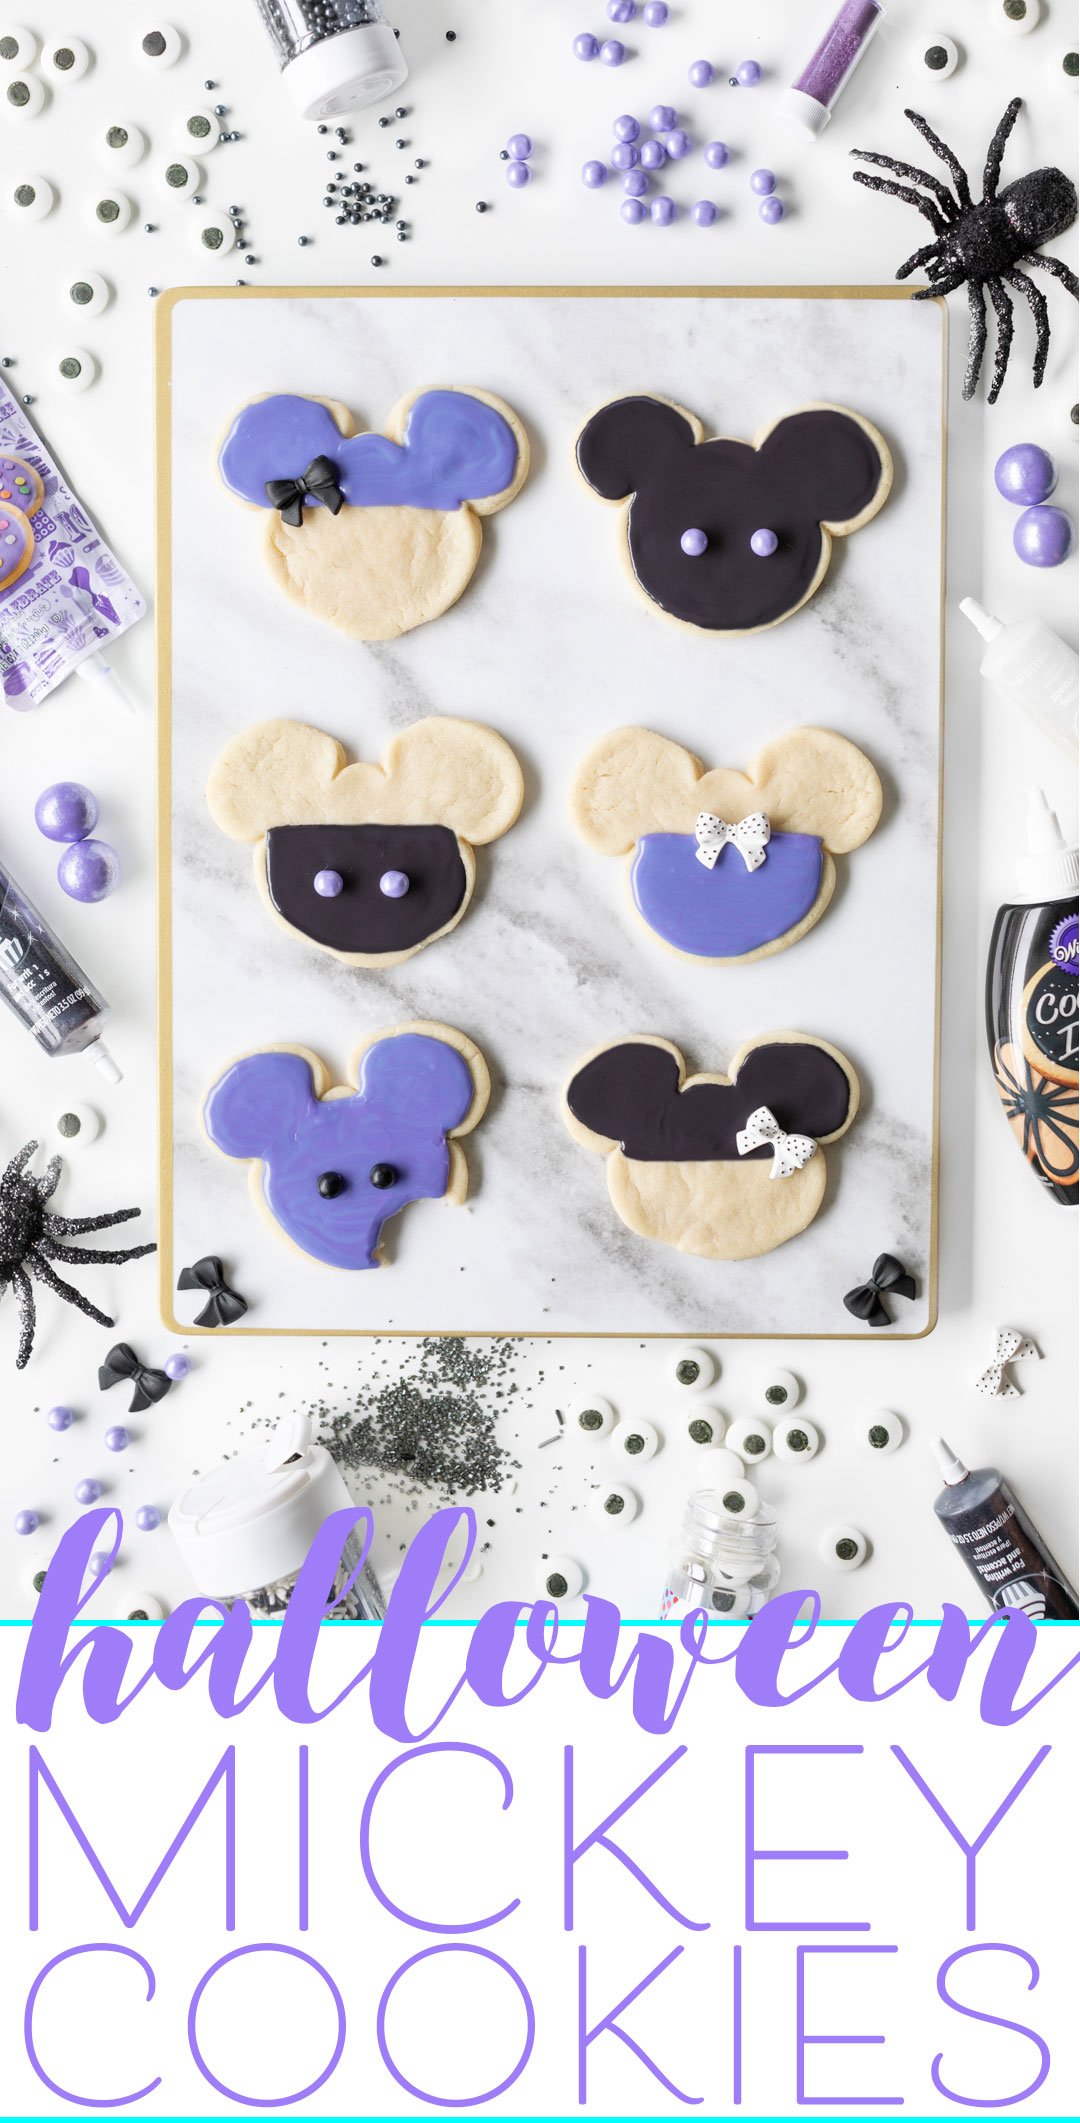 Halloween Mickey Cookies that are Purple and Black to celebrate Haunted Mansion and Ursula and are perfect for Disney Parties.